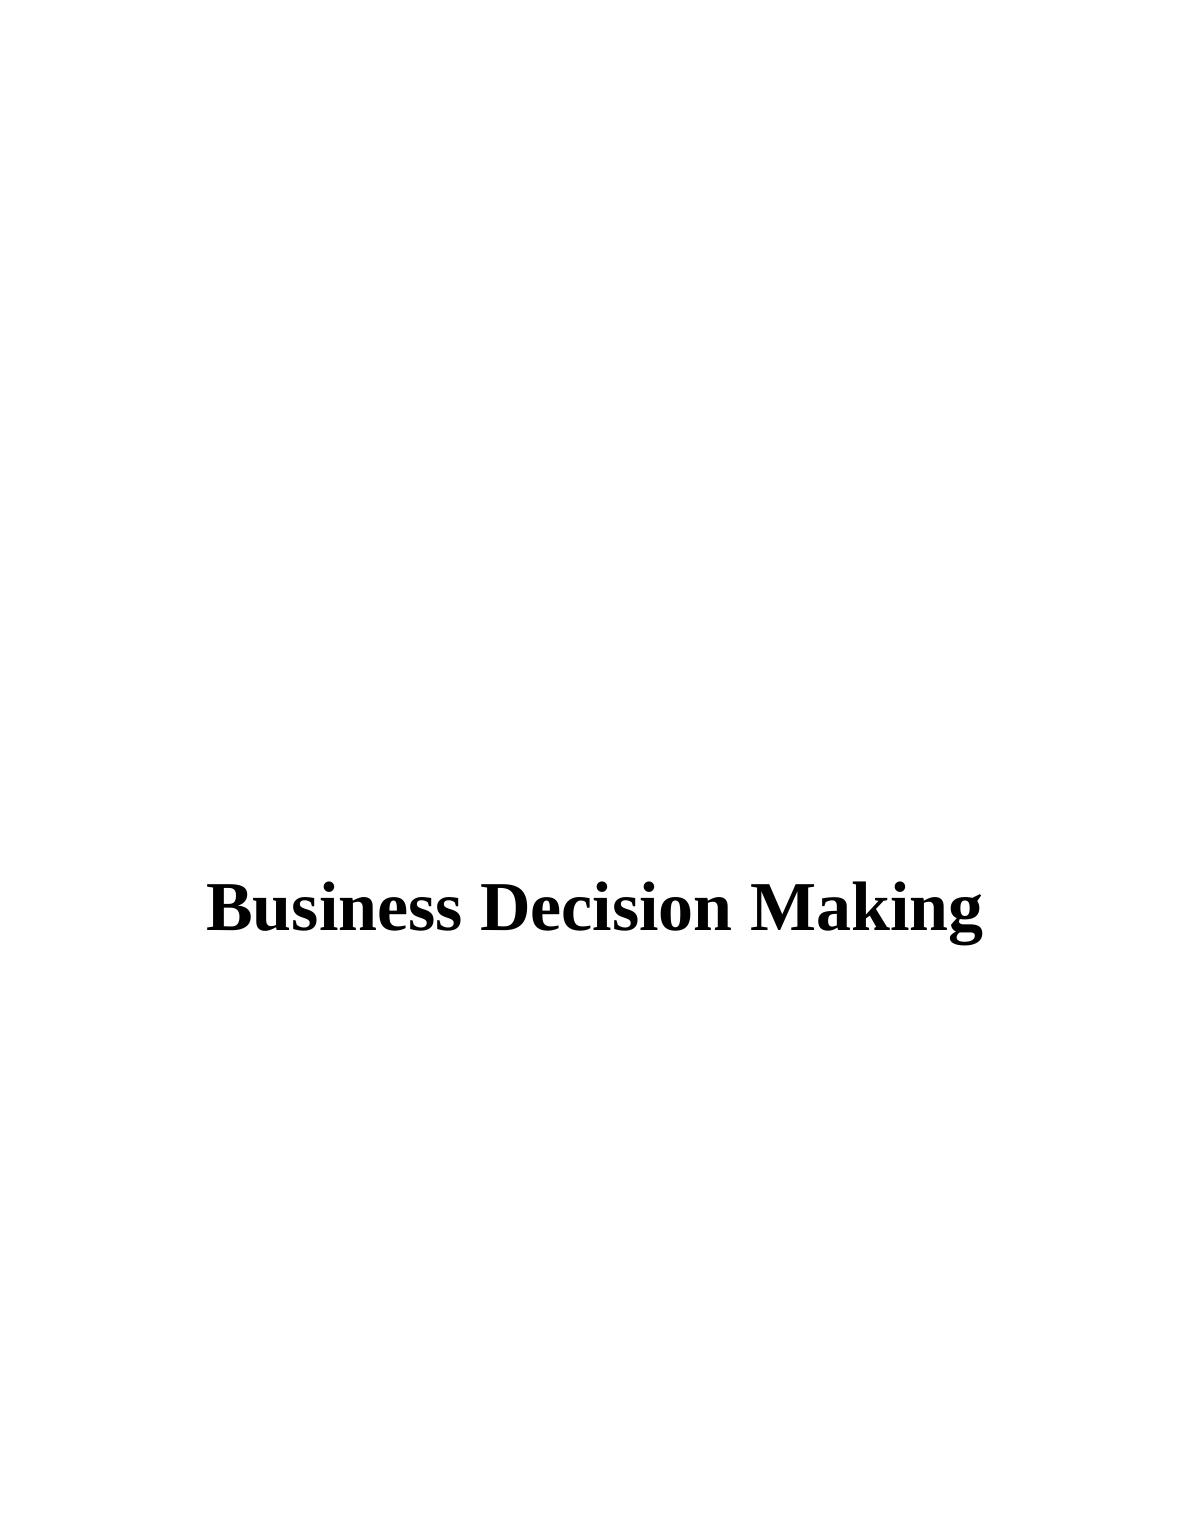 Business Decision Making - TUI Group_1